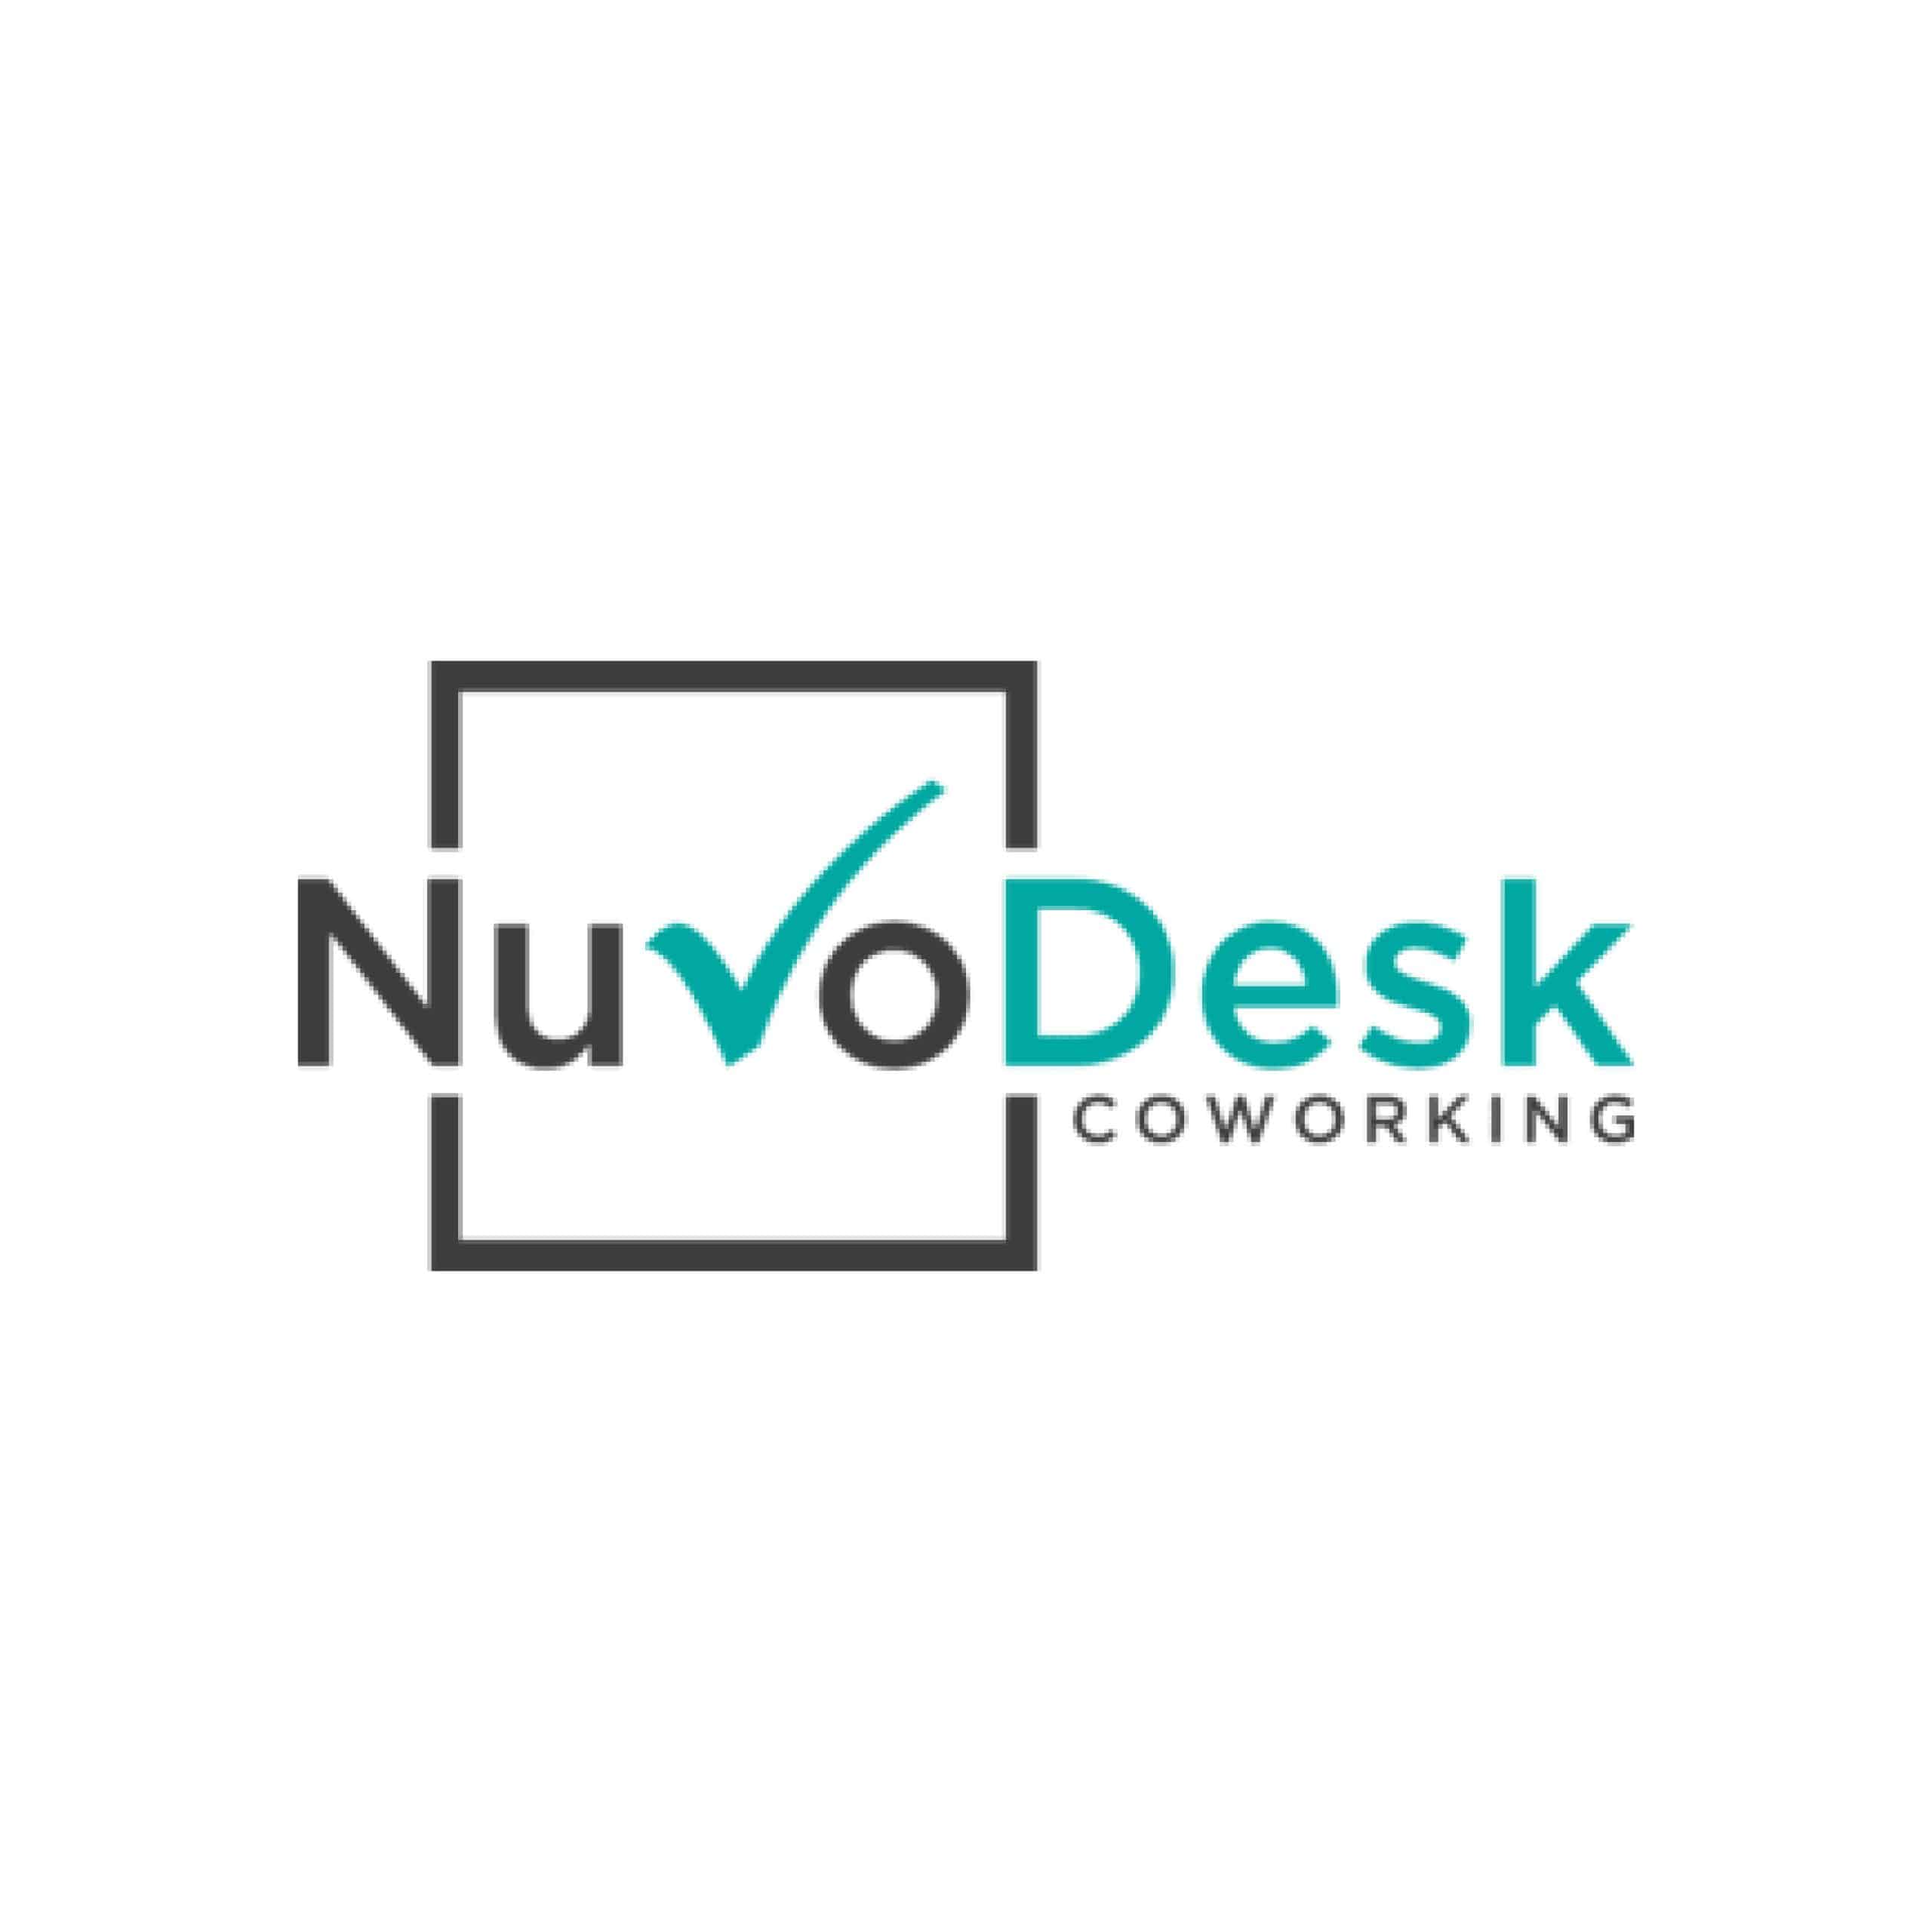 nuvodesk coworking logo